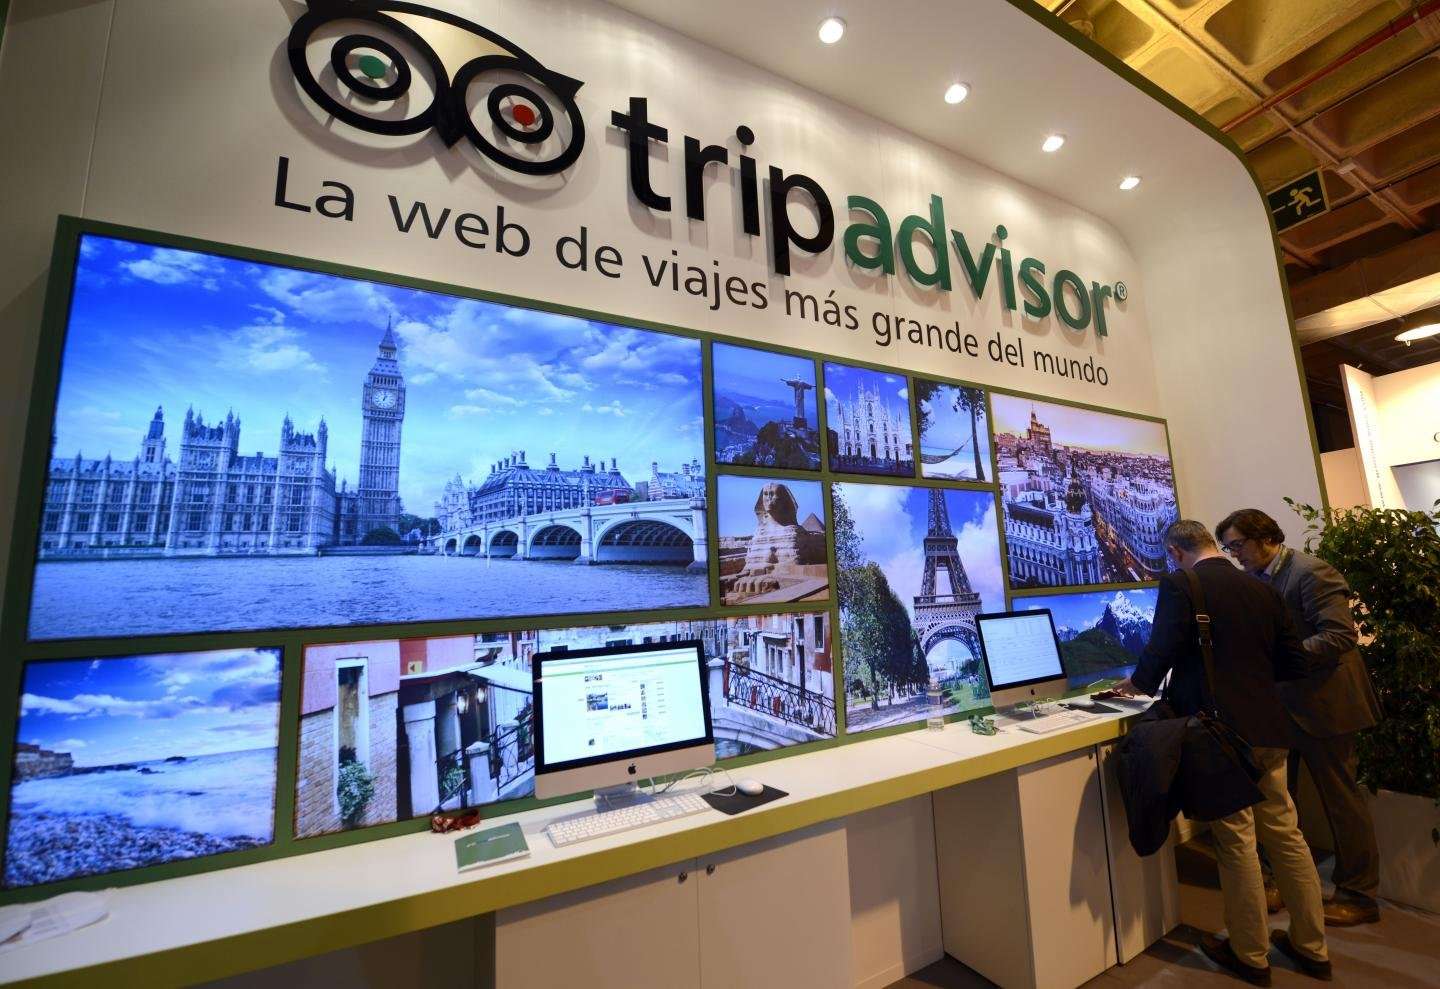 image for Woman Tells TripAdvisor She Was Raped by Tour Guide, TripAdvisor Tells Her to Leave Negative Review